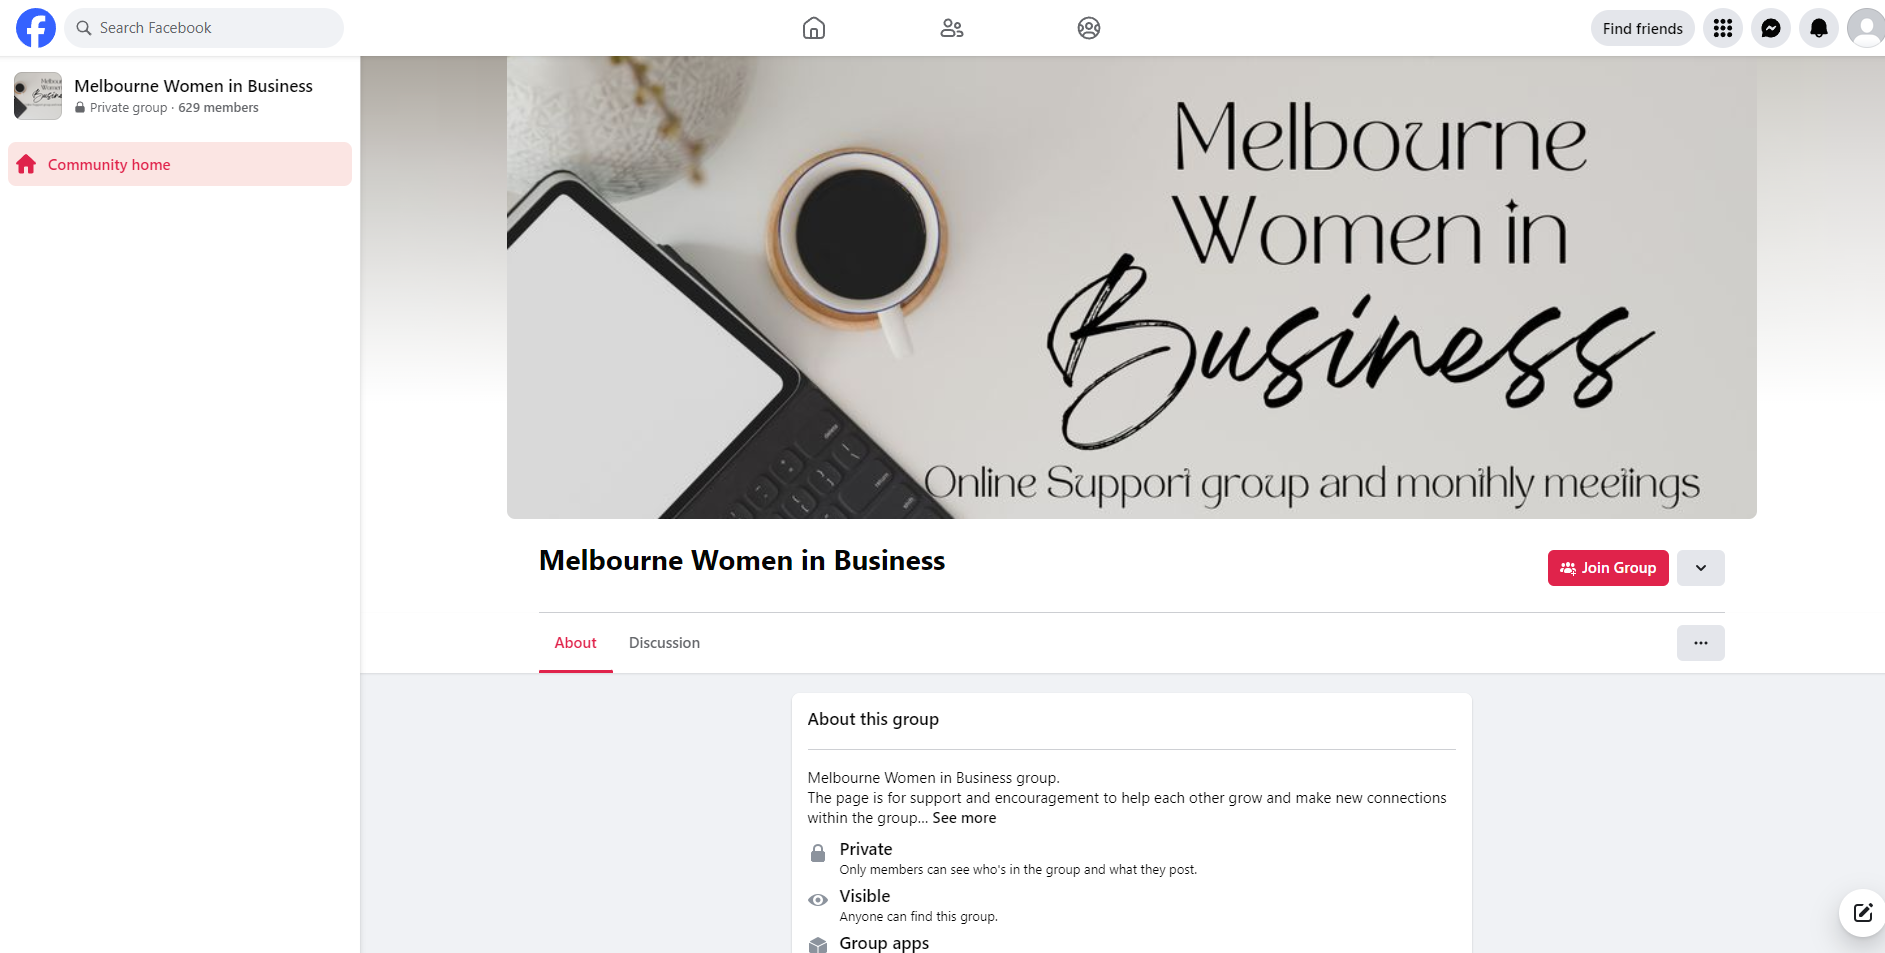 North Melbourne Mums in Business